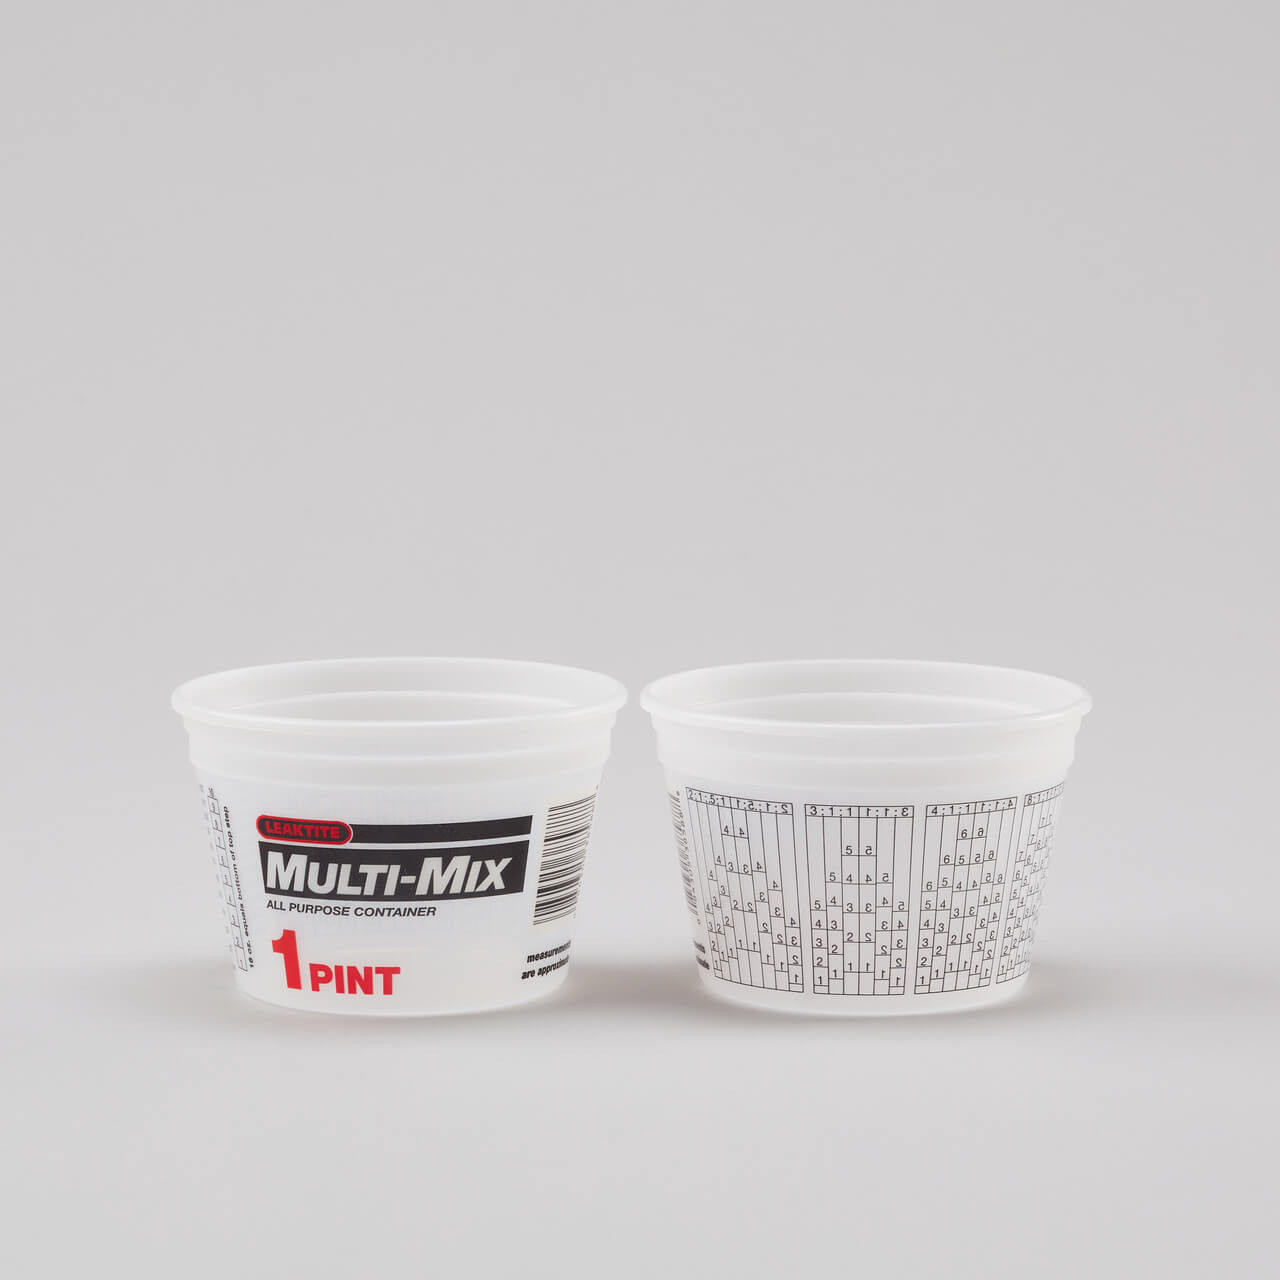 1 oz Graduated Mixing Cups 100CT